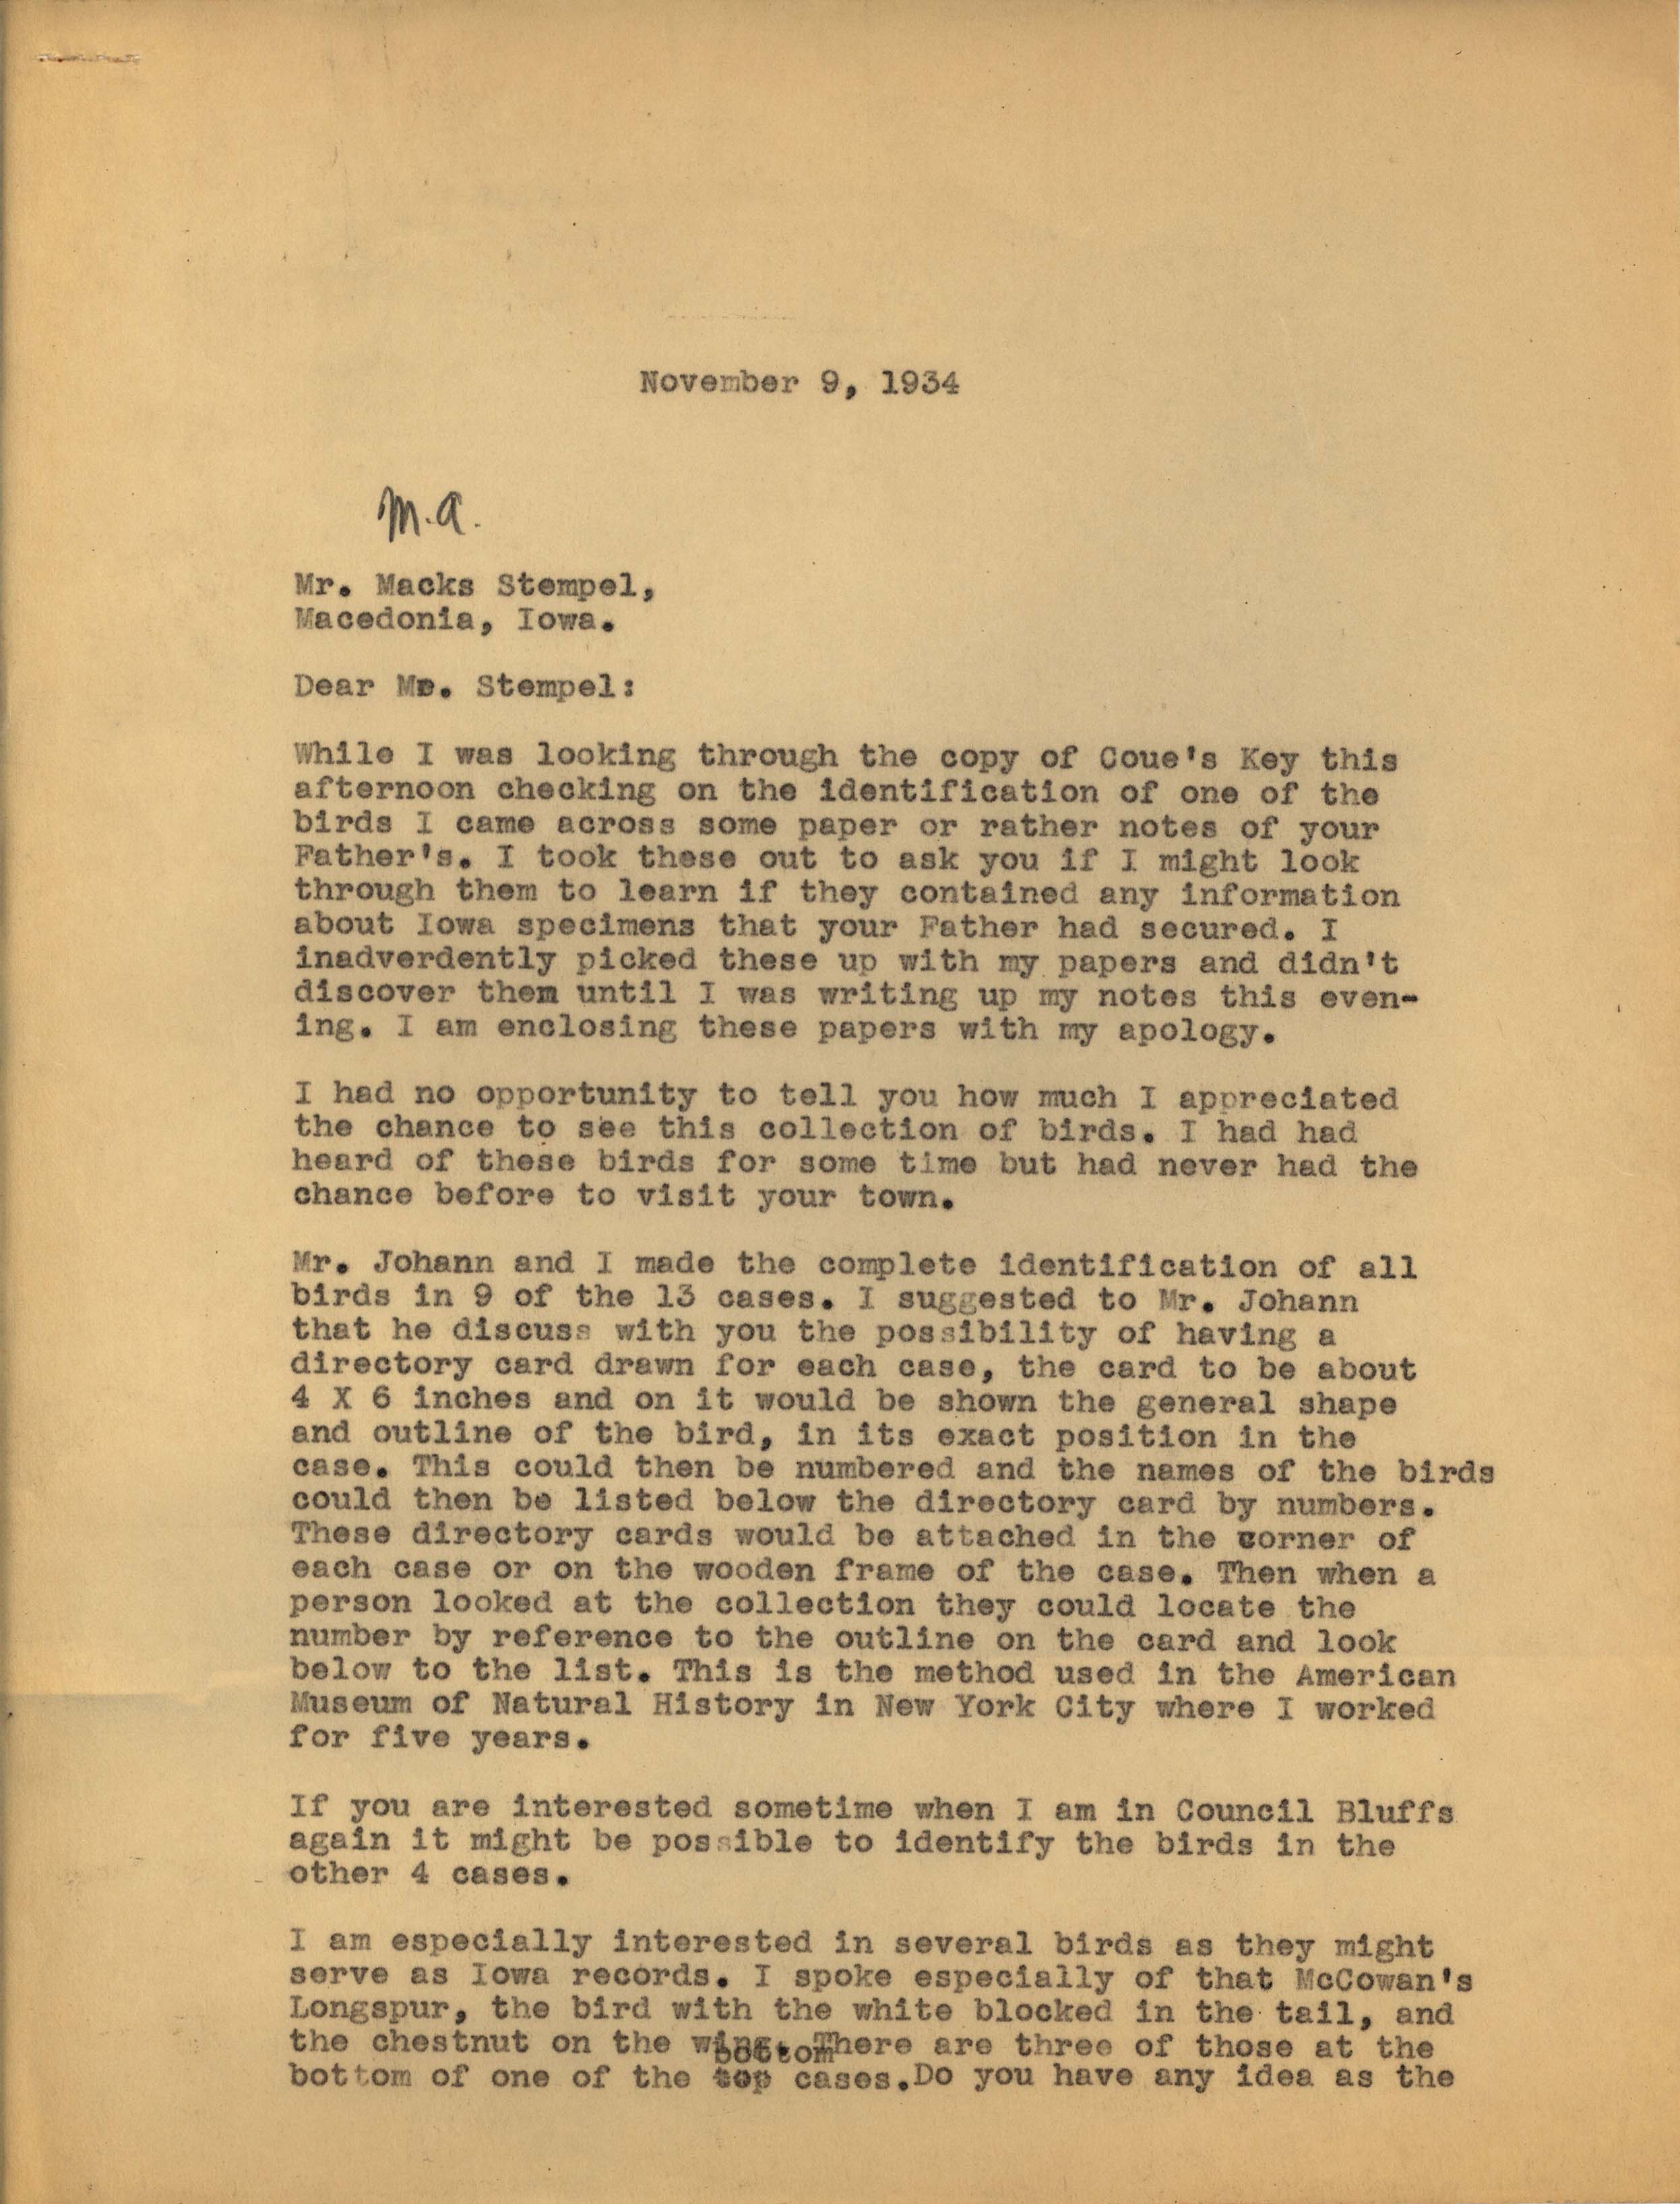 Philip DuMont letter to Max Stempel regarding records for the Stempel collection, November 9, 1934